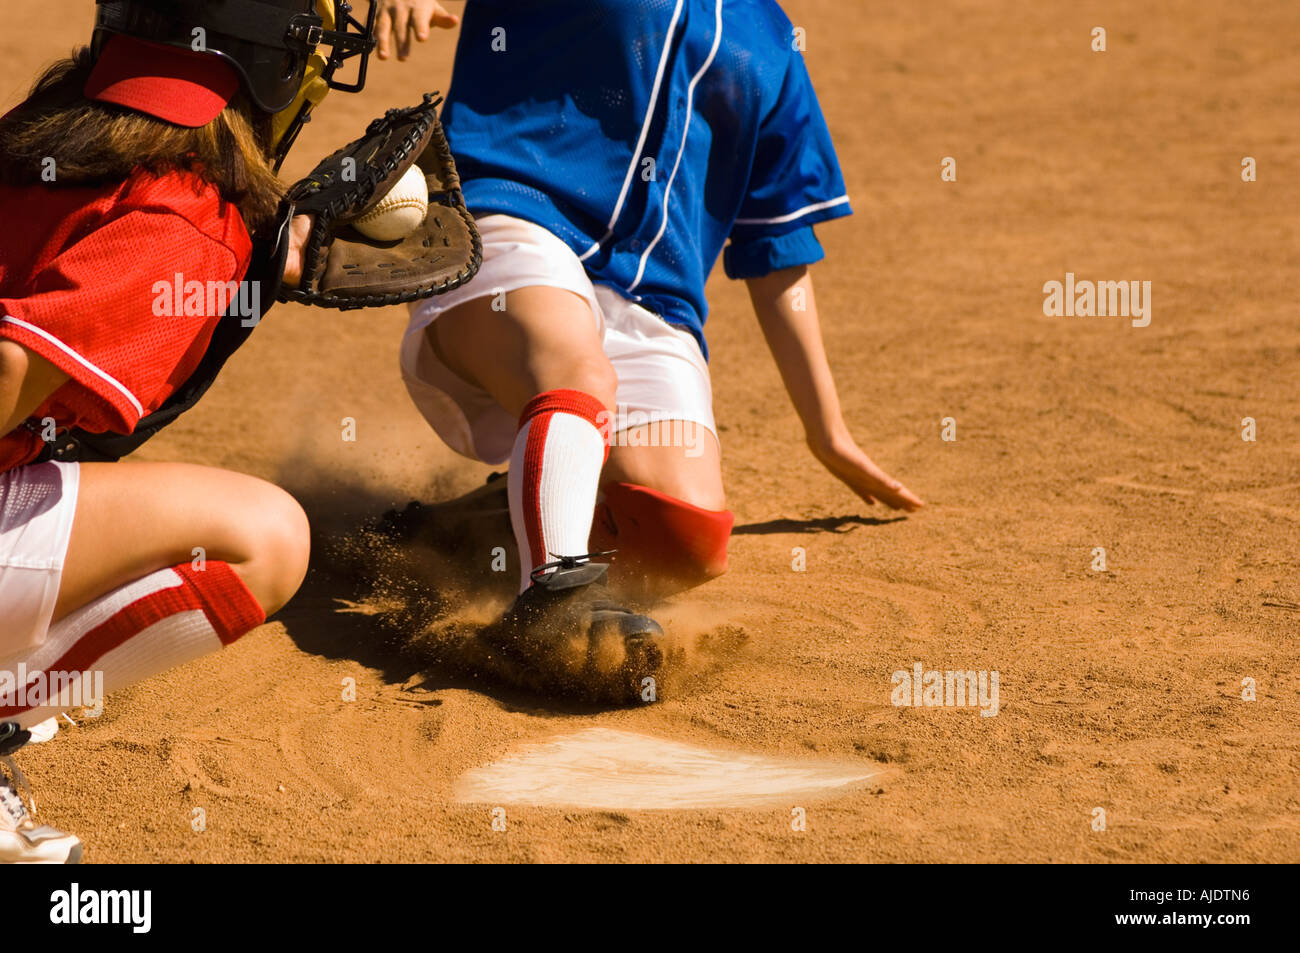 Softball player sliding into home plate, low section Stock Photo